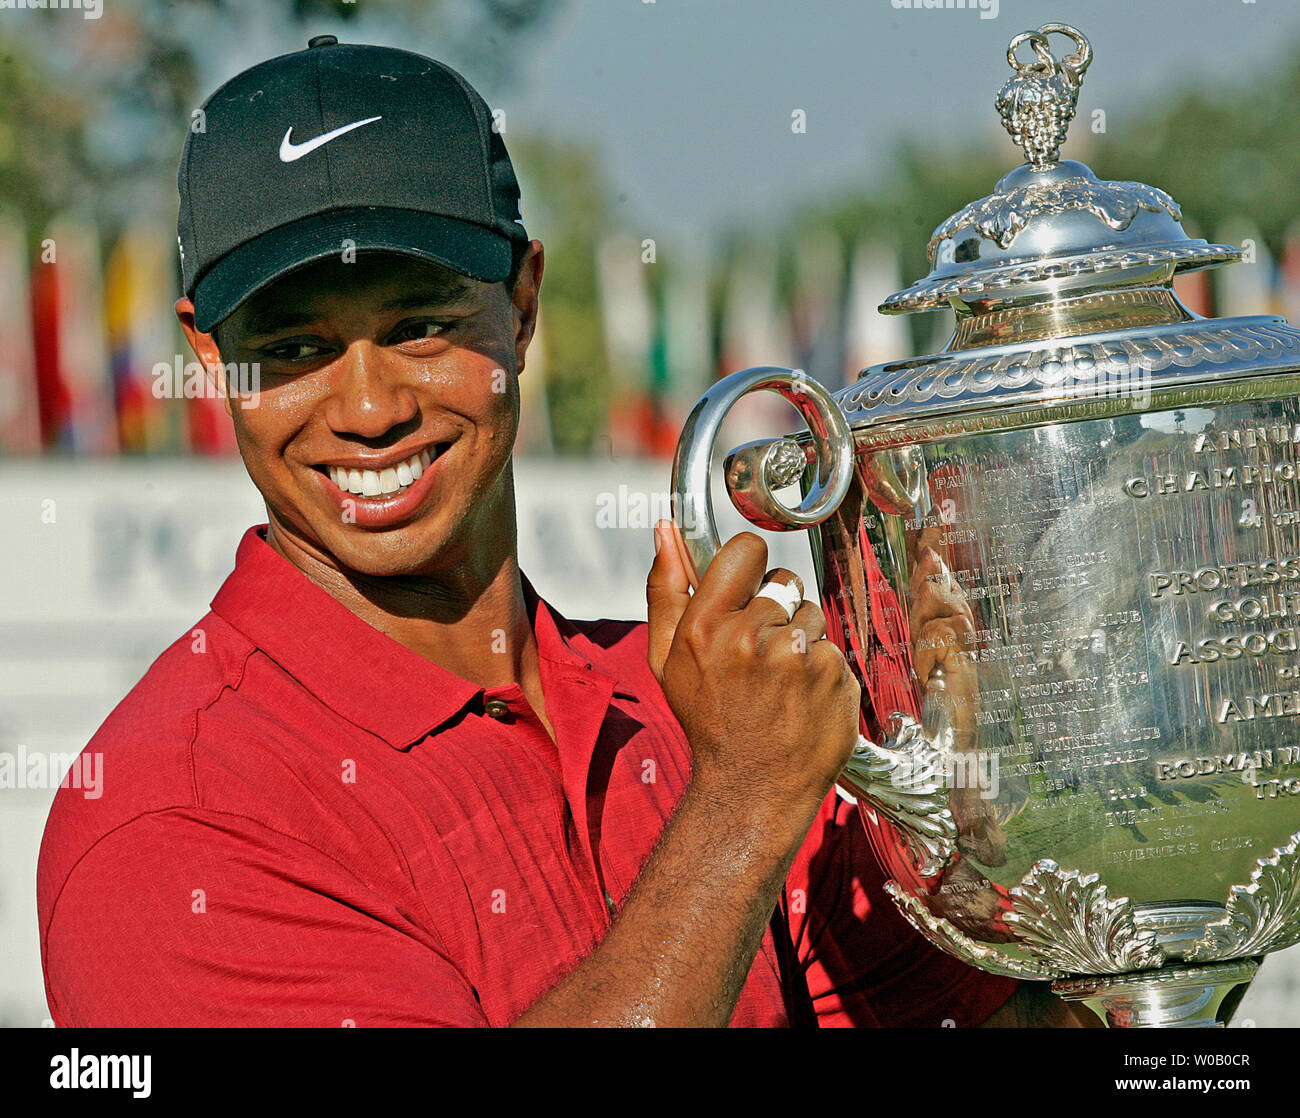 Tiger Woods holds the Wanamaker trophy after winning the 89th PGA Championship at Southern Hills Country Club in Tulsa, Oklahoma on August 12, 2007. Tiger Woods earned his 13th major winning the PGA with a eight under par 272. (UPI Photo/Gary C. Caskey) Stock Photo